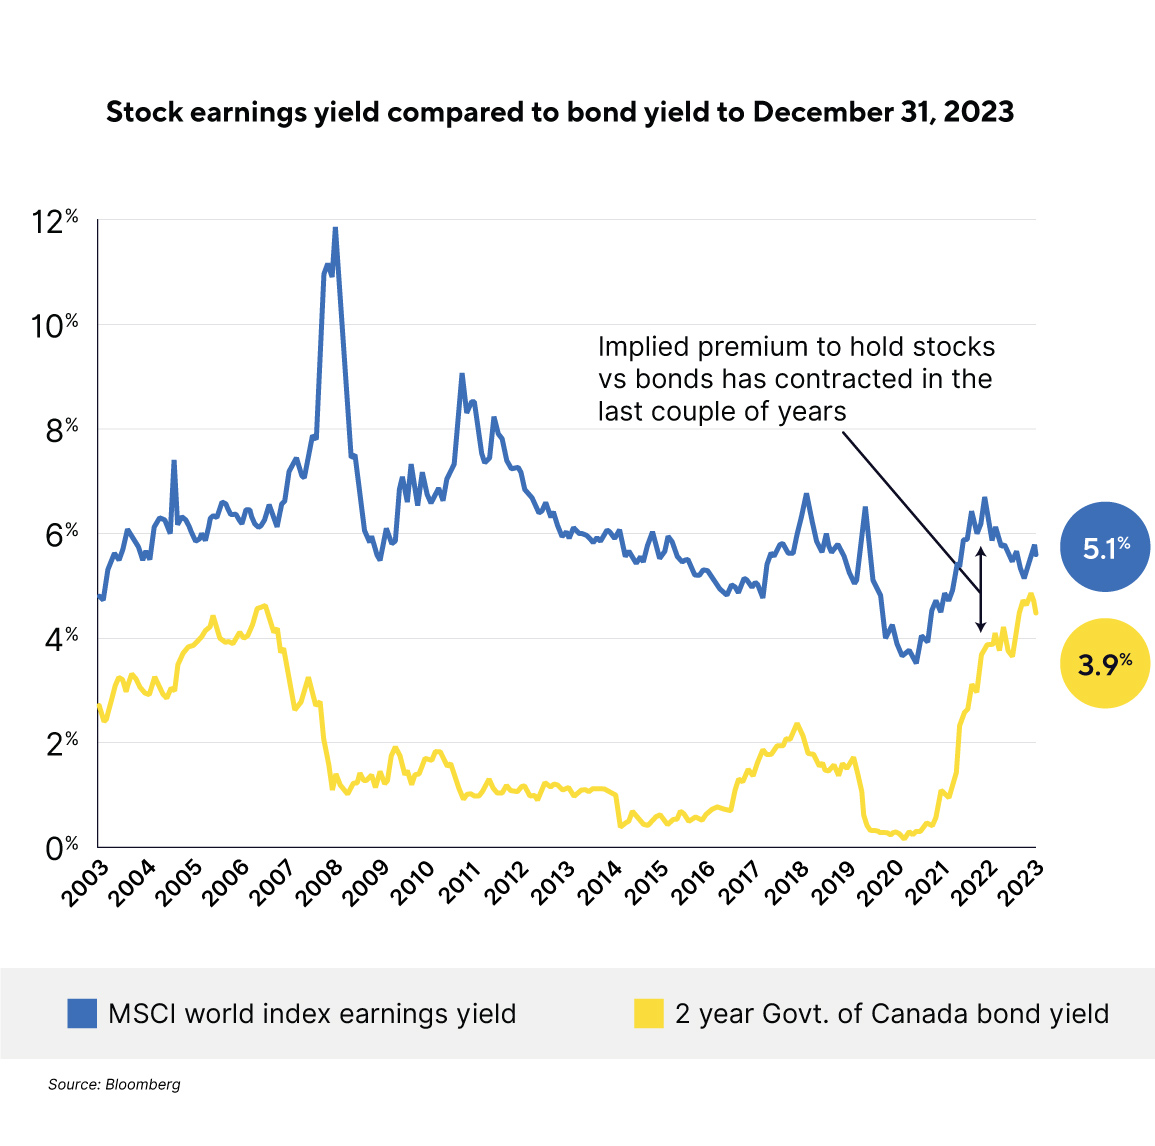 graph to show stock earnings yield compared to bond yield - 2003 to 2023